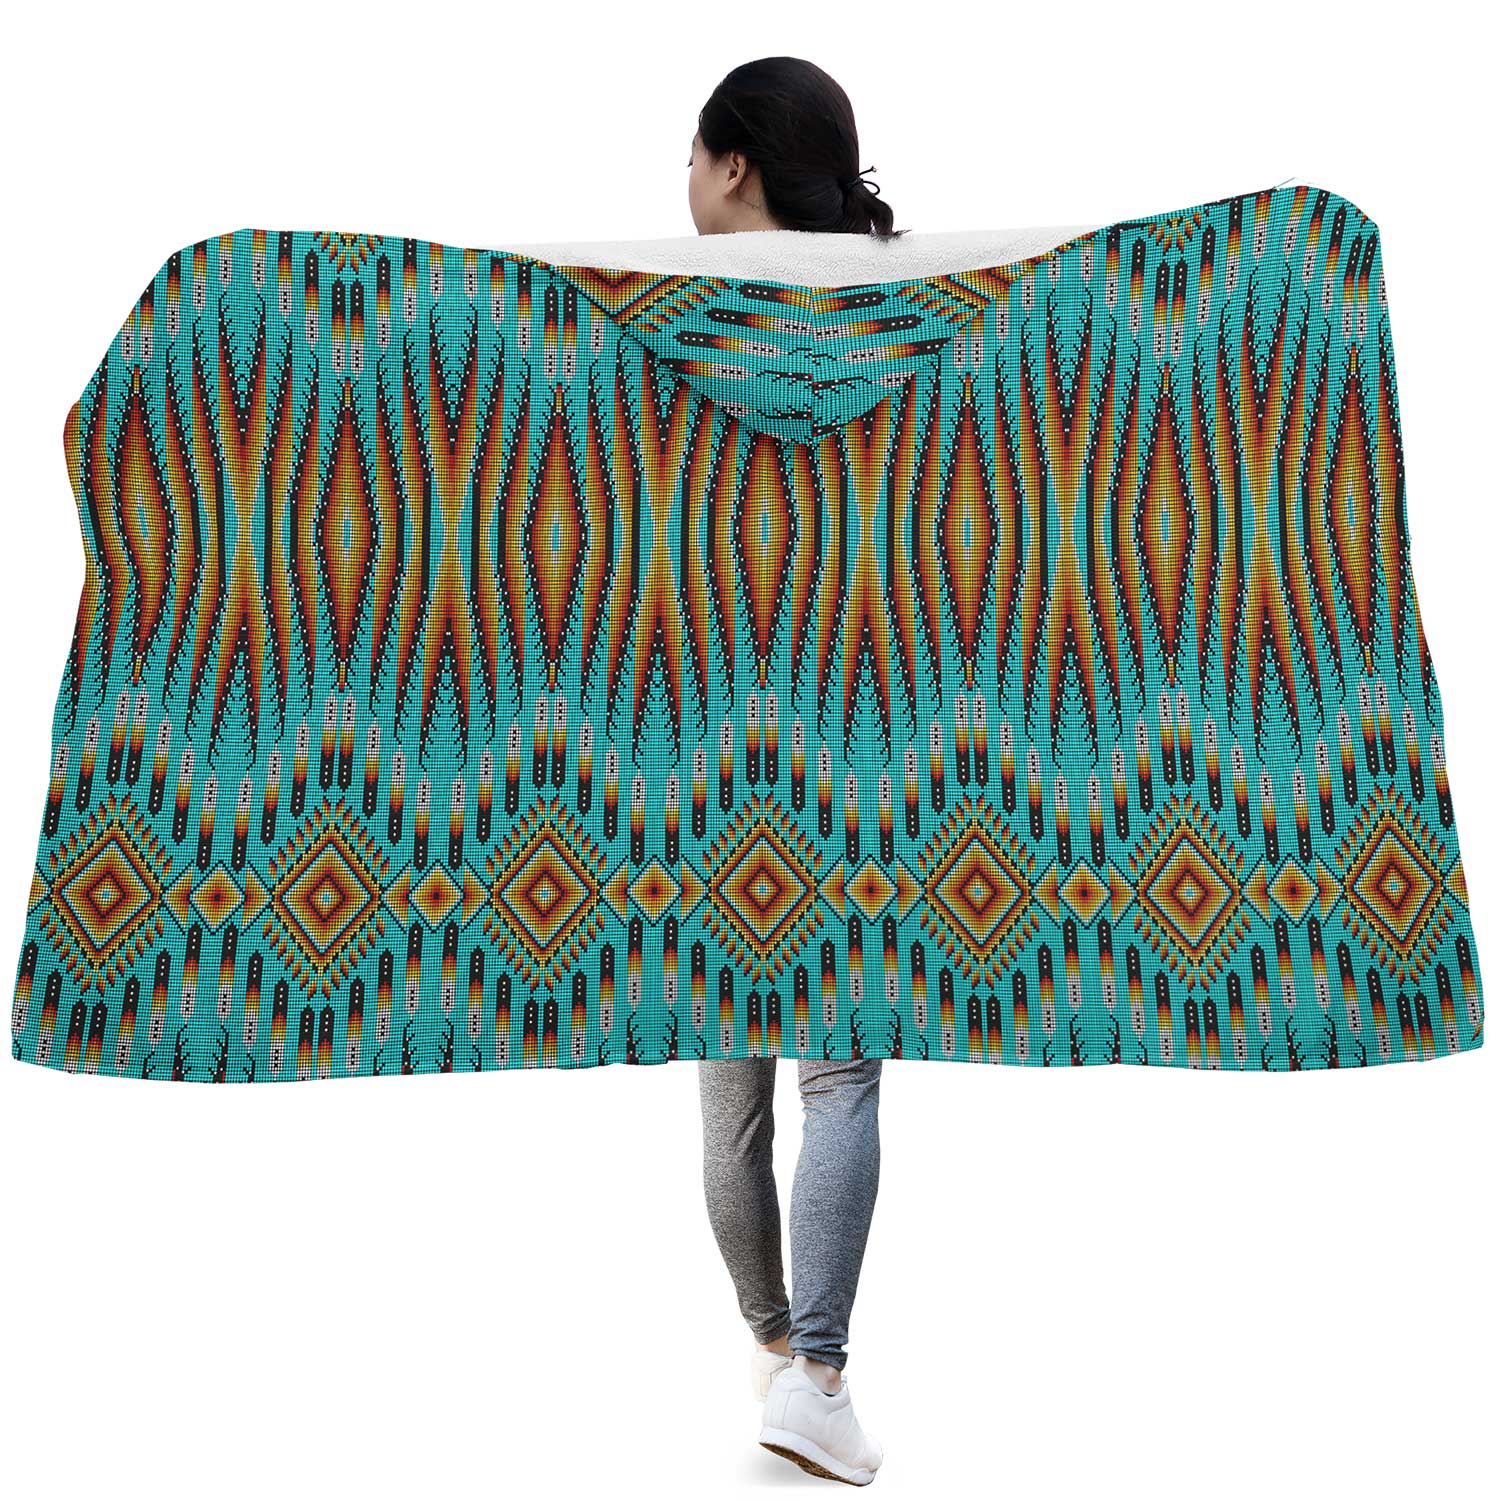 Fire Feather Turquoise Hooded Blanket